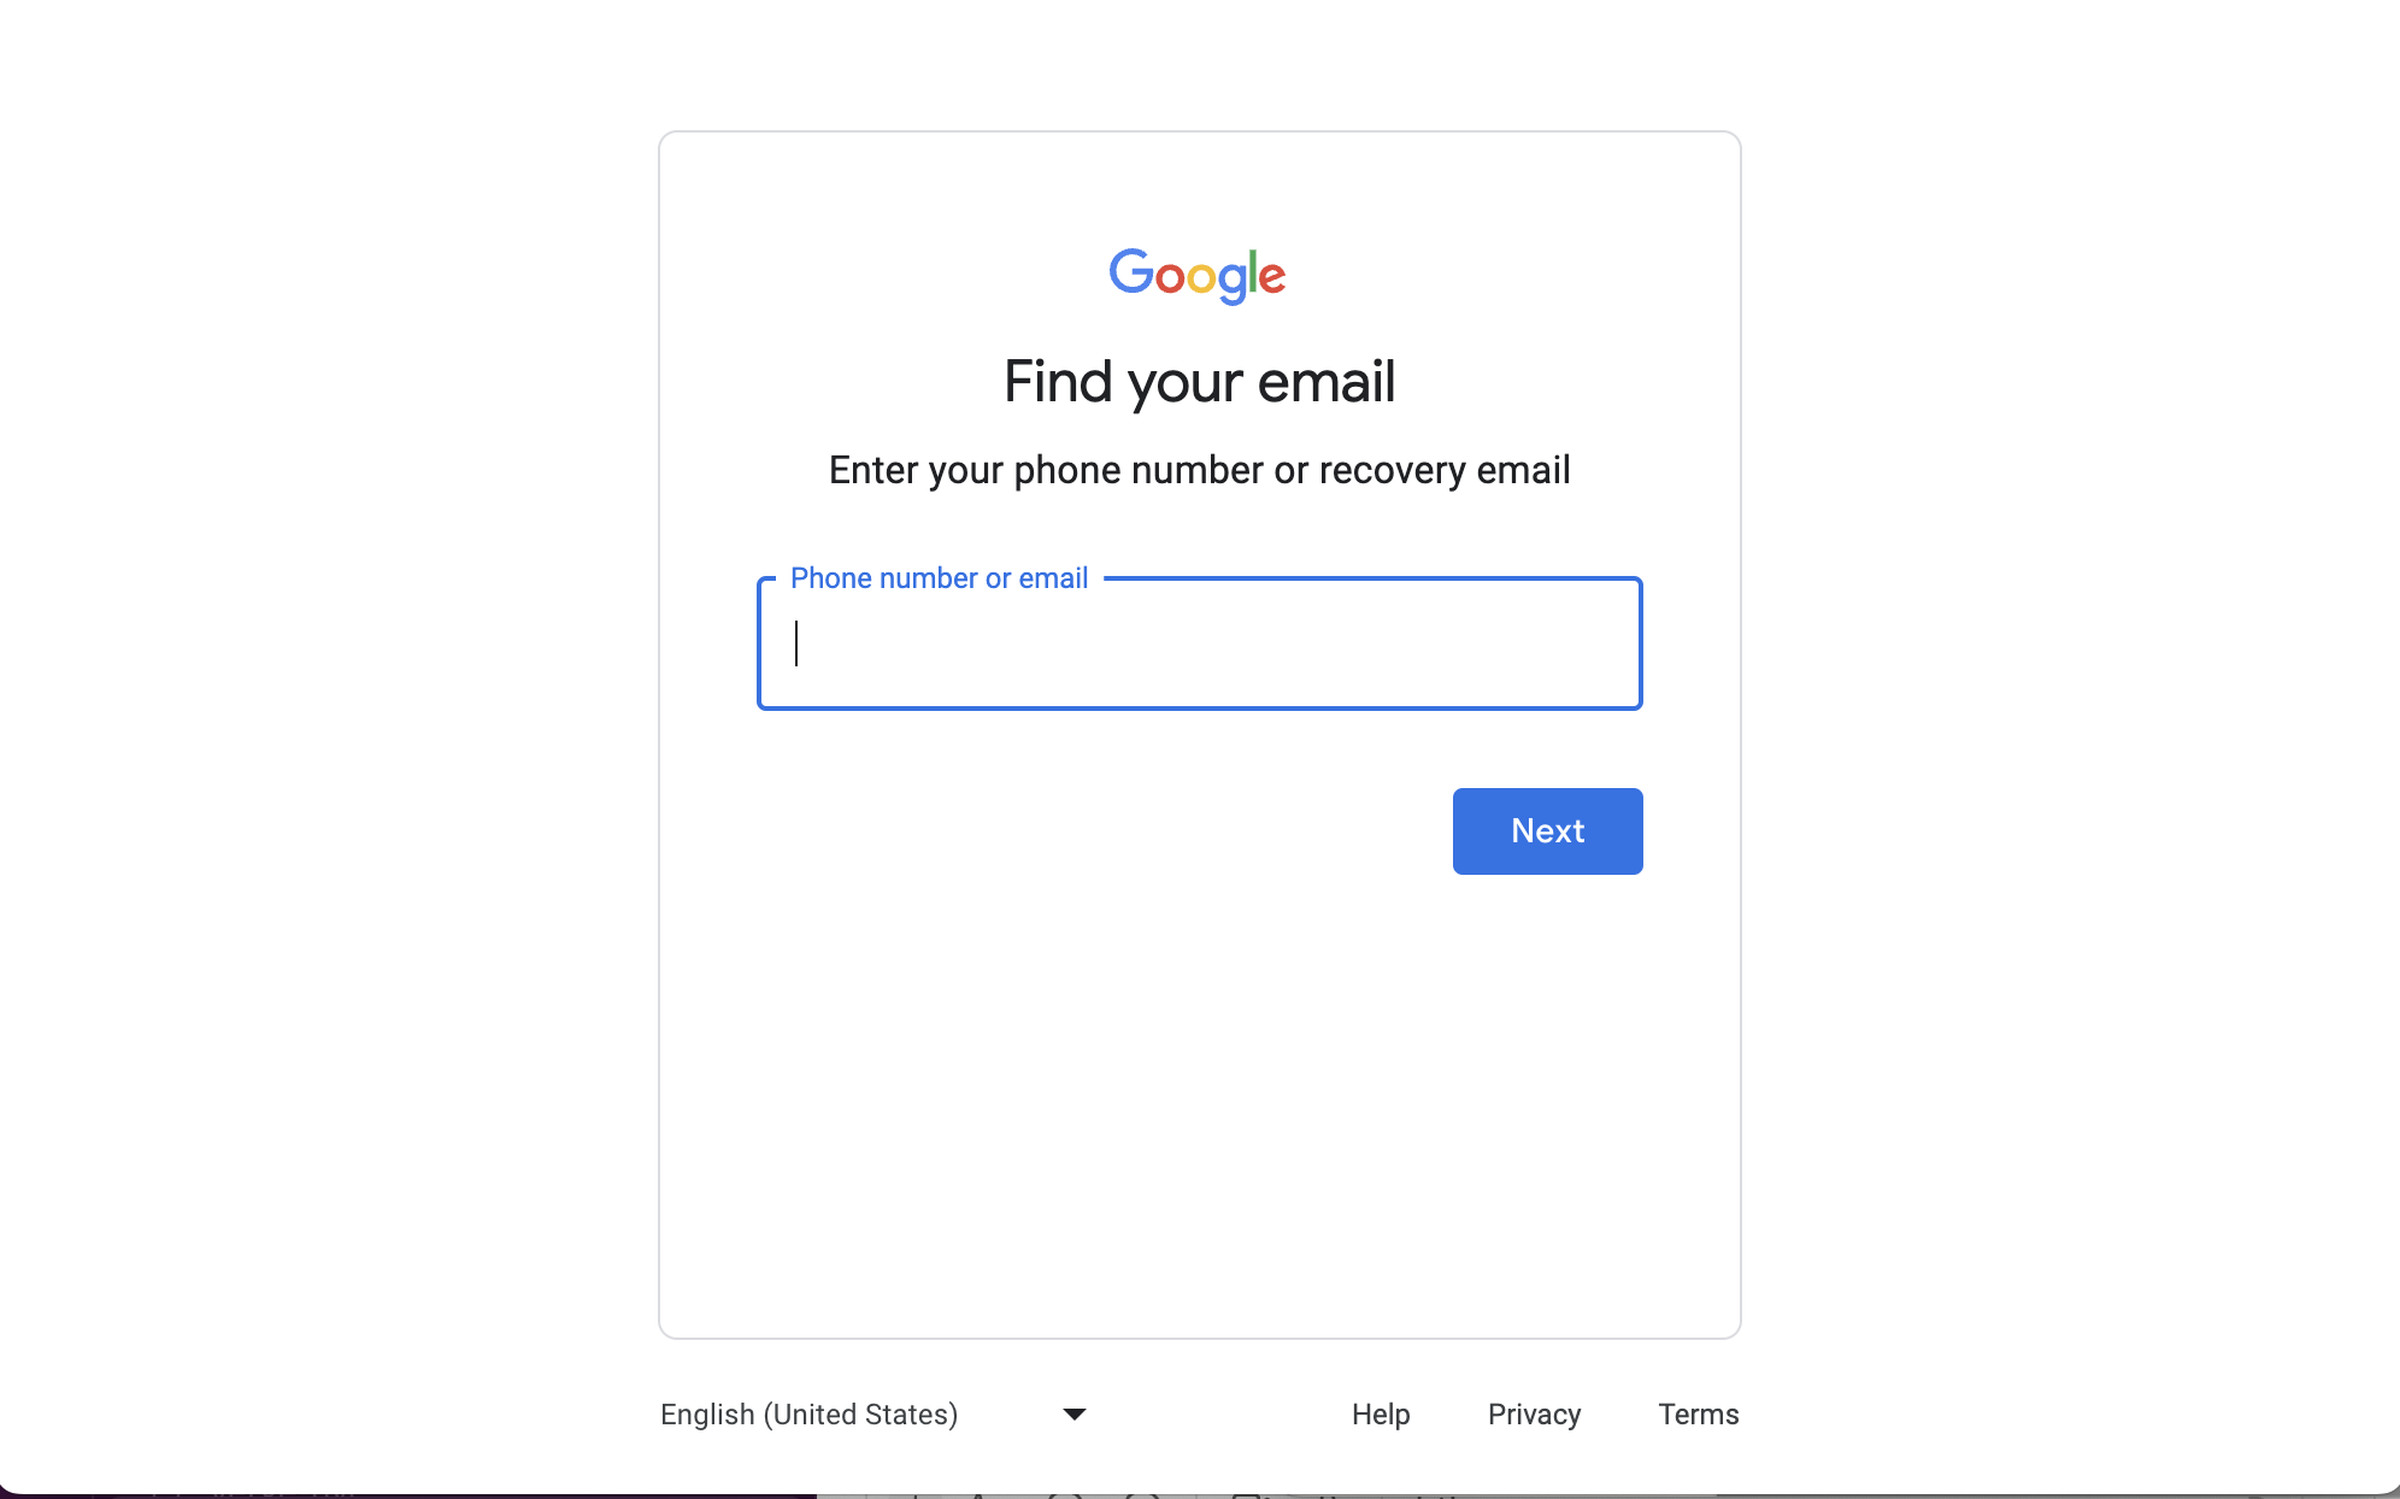 Google page with “find your email” on top, then “Enter your phone number or recovery email,” then an entry space, then a Next button.